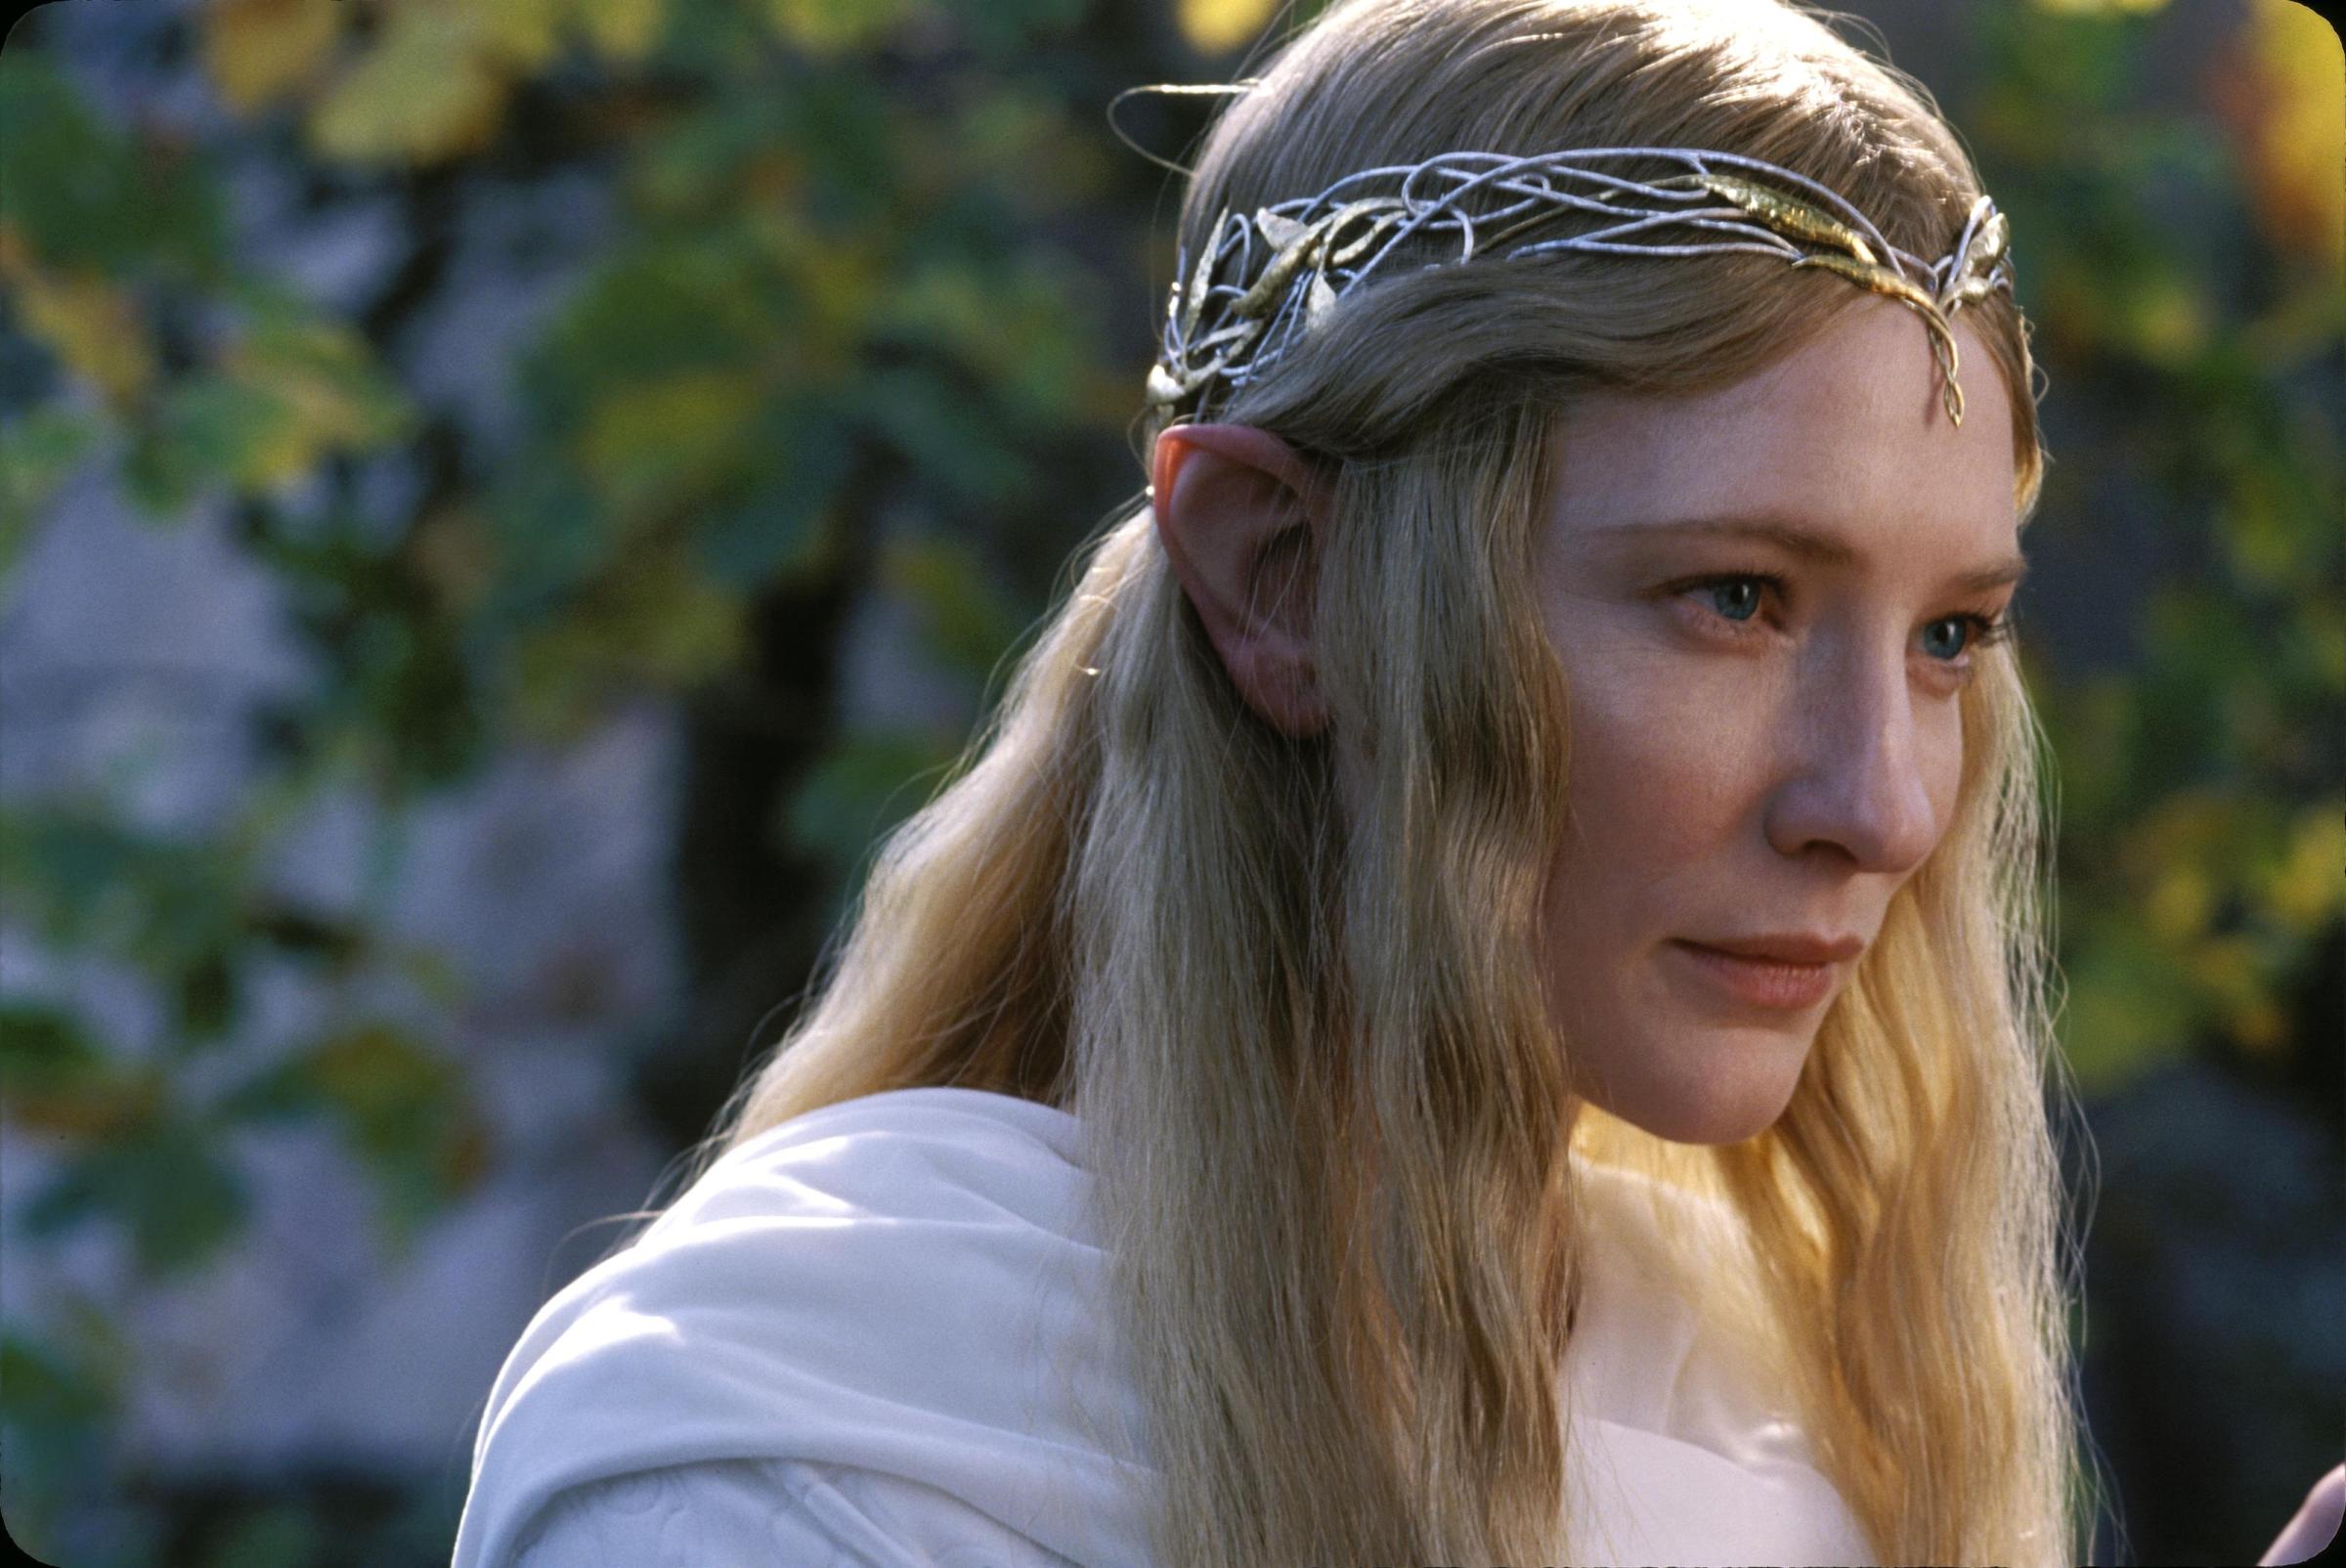 Cate Blanchett as Galadriel in 'The Lord of the Rings: The Fellowship of the Ring'